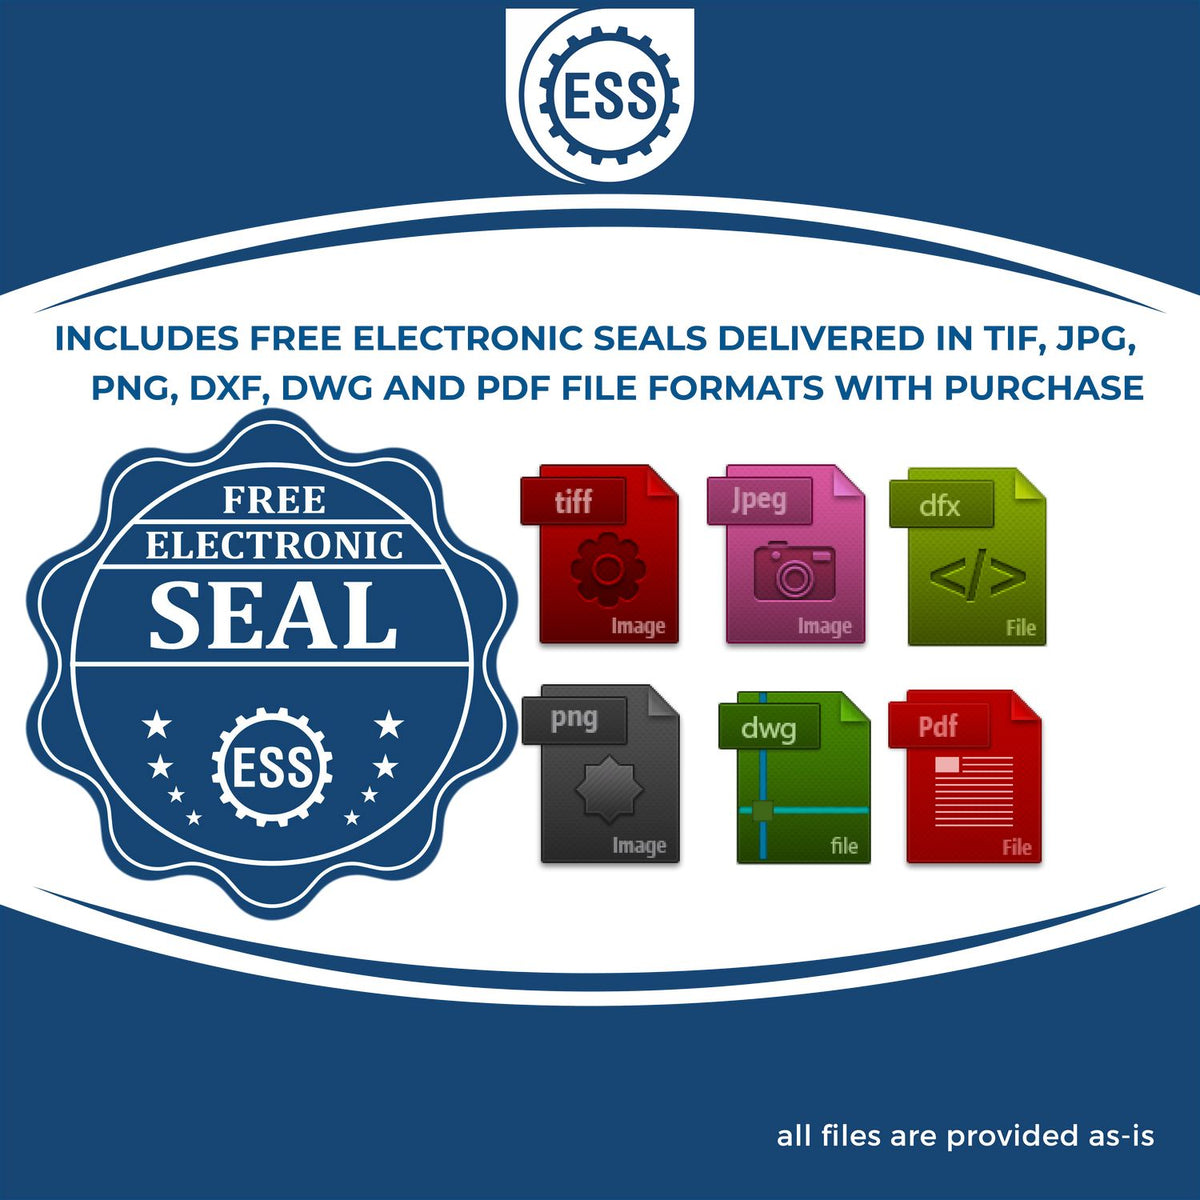 An infographic for the free electronic seal for the Self-Inking Maryland PE Stamp illustrating the different file type icons such as DXF, DWG, TIF, JPG and PNG.